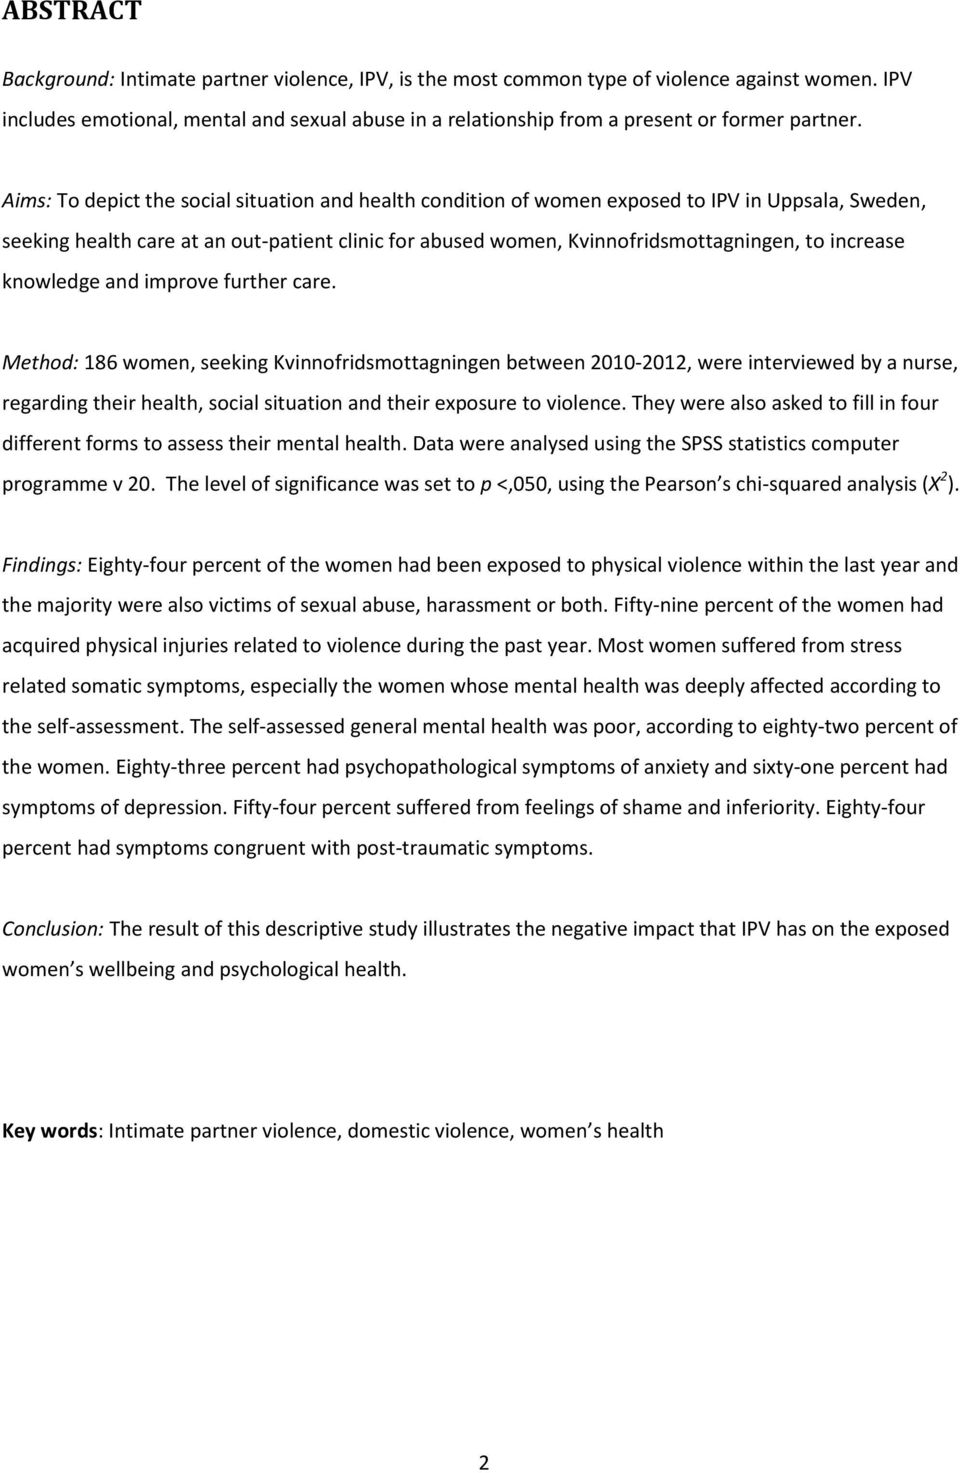 Aims: To depict the social situation and health condition of women exposed to IPV in Uppsala, Sweden, seeking health care at an out-patient clinic for abused women, Kvinnofridsmottagningen, to